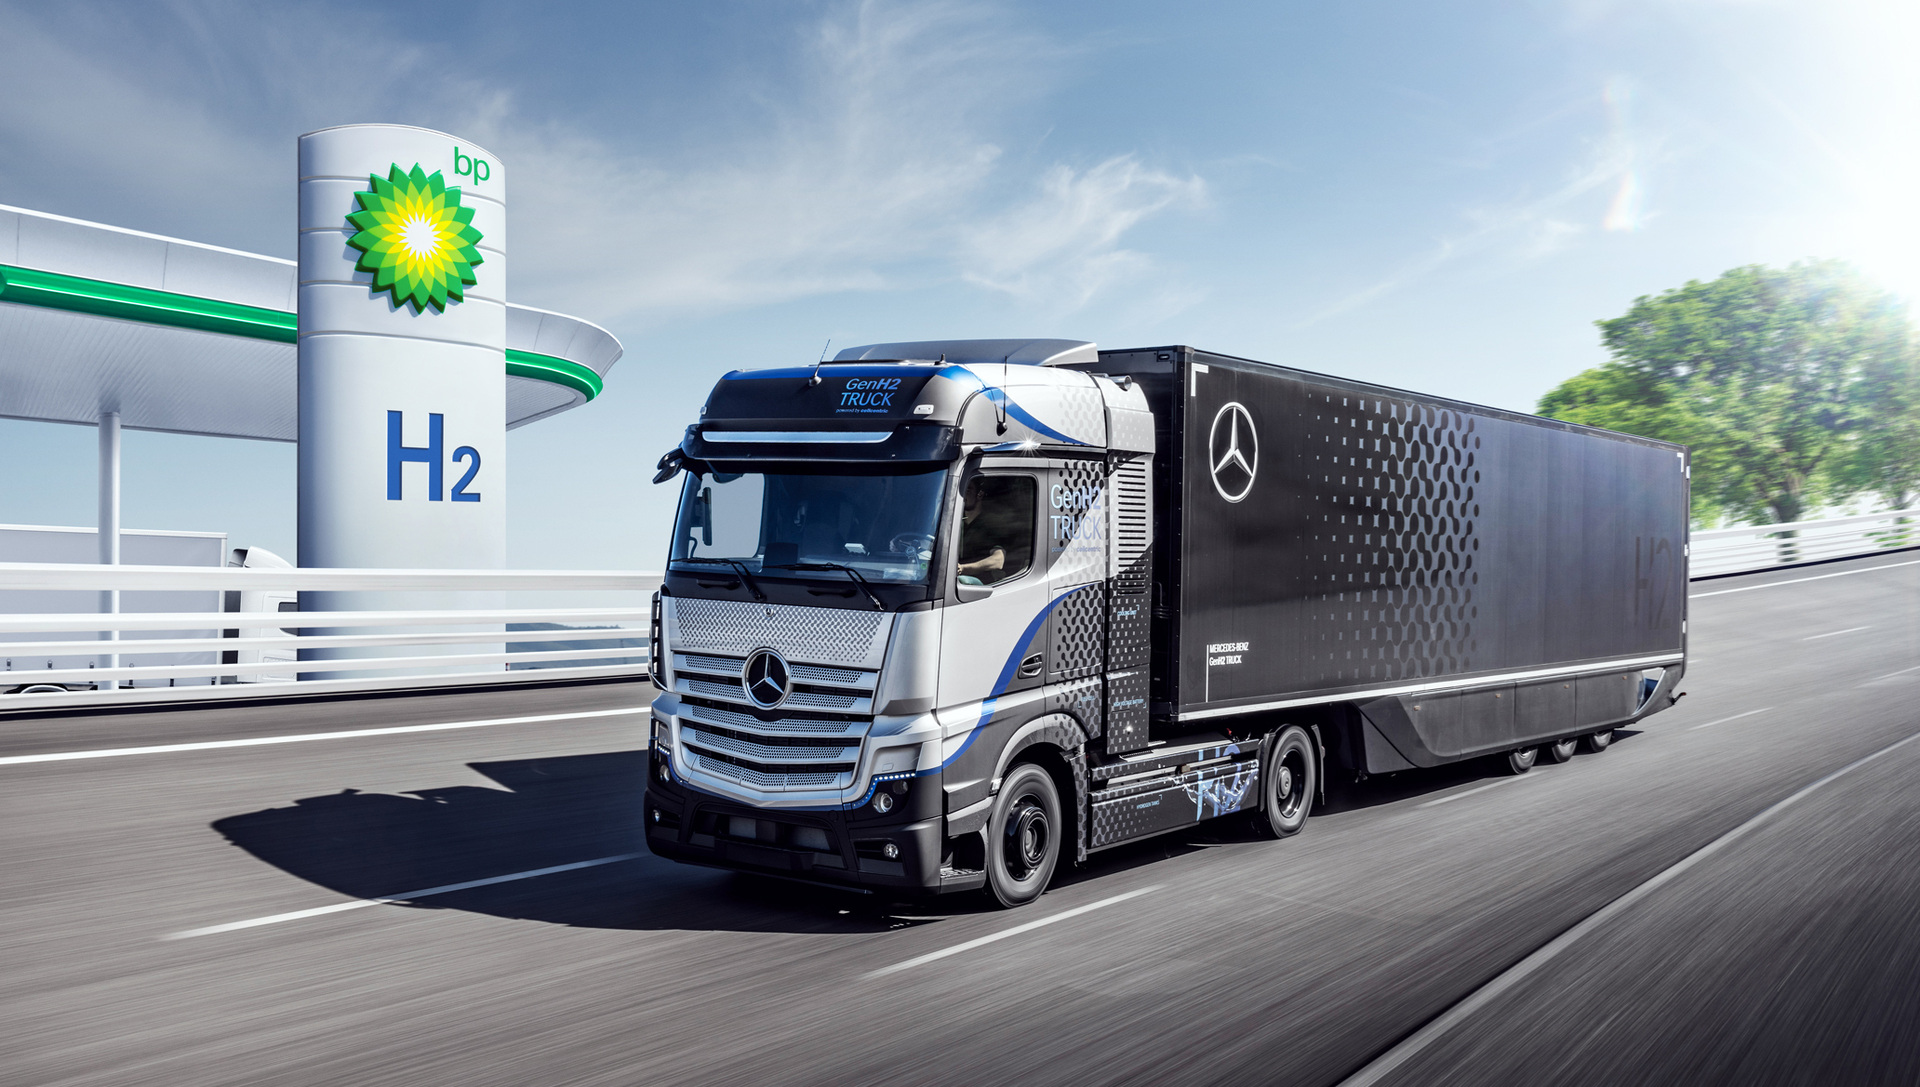 Daimler Truck AG and BP to pioneer deployment of hydrogen infrastructure, supporting the decarbonization of UK freight transport